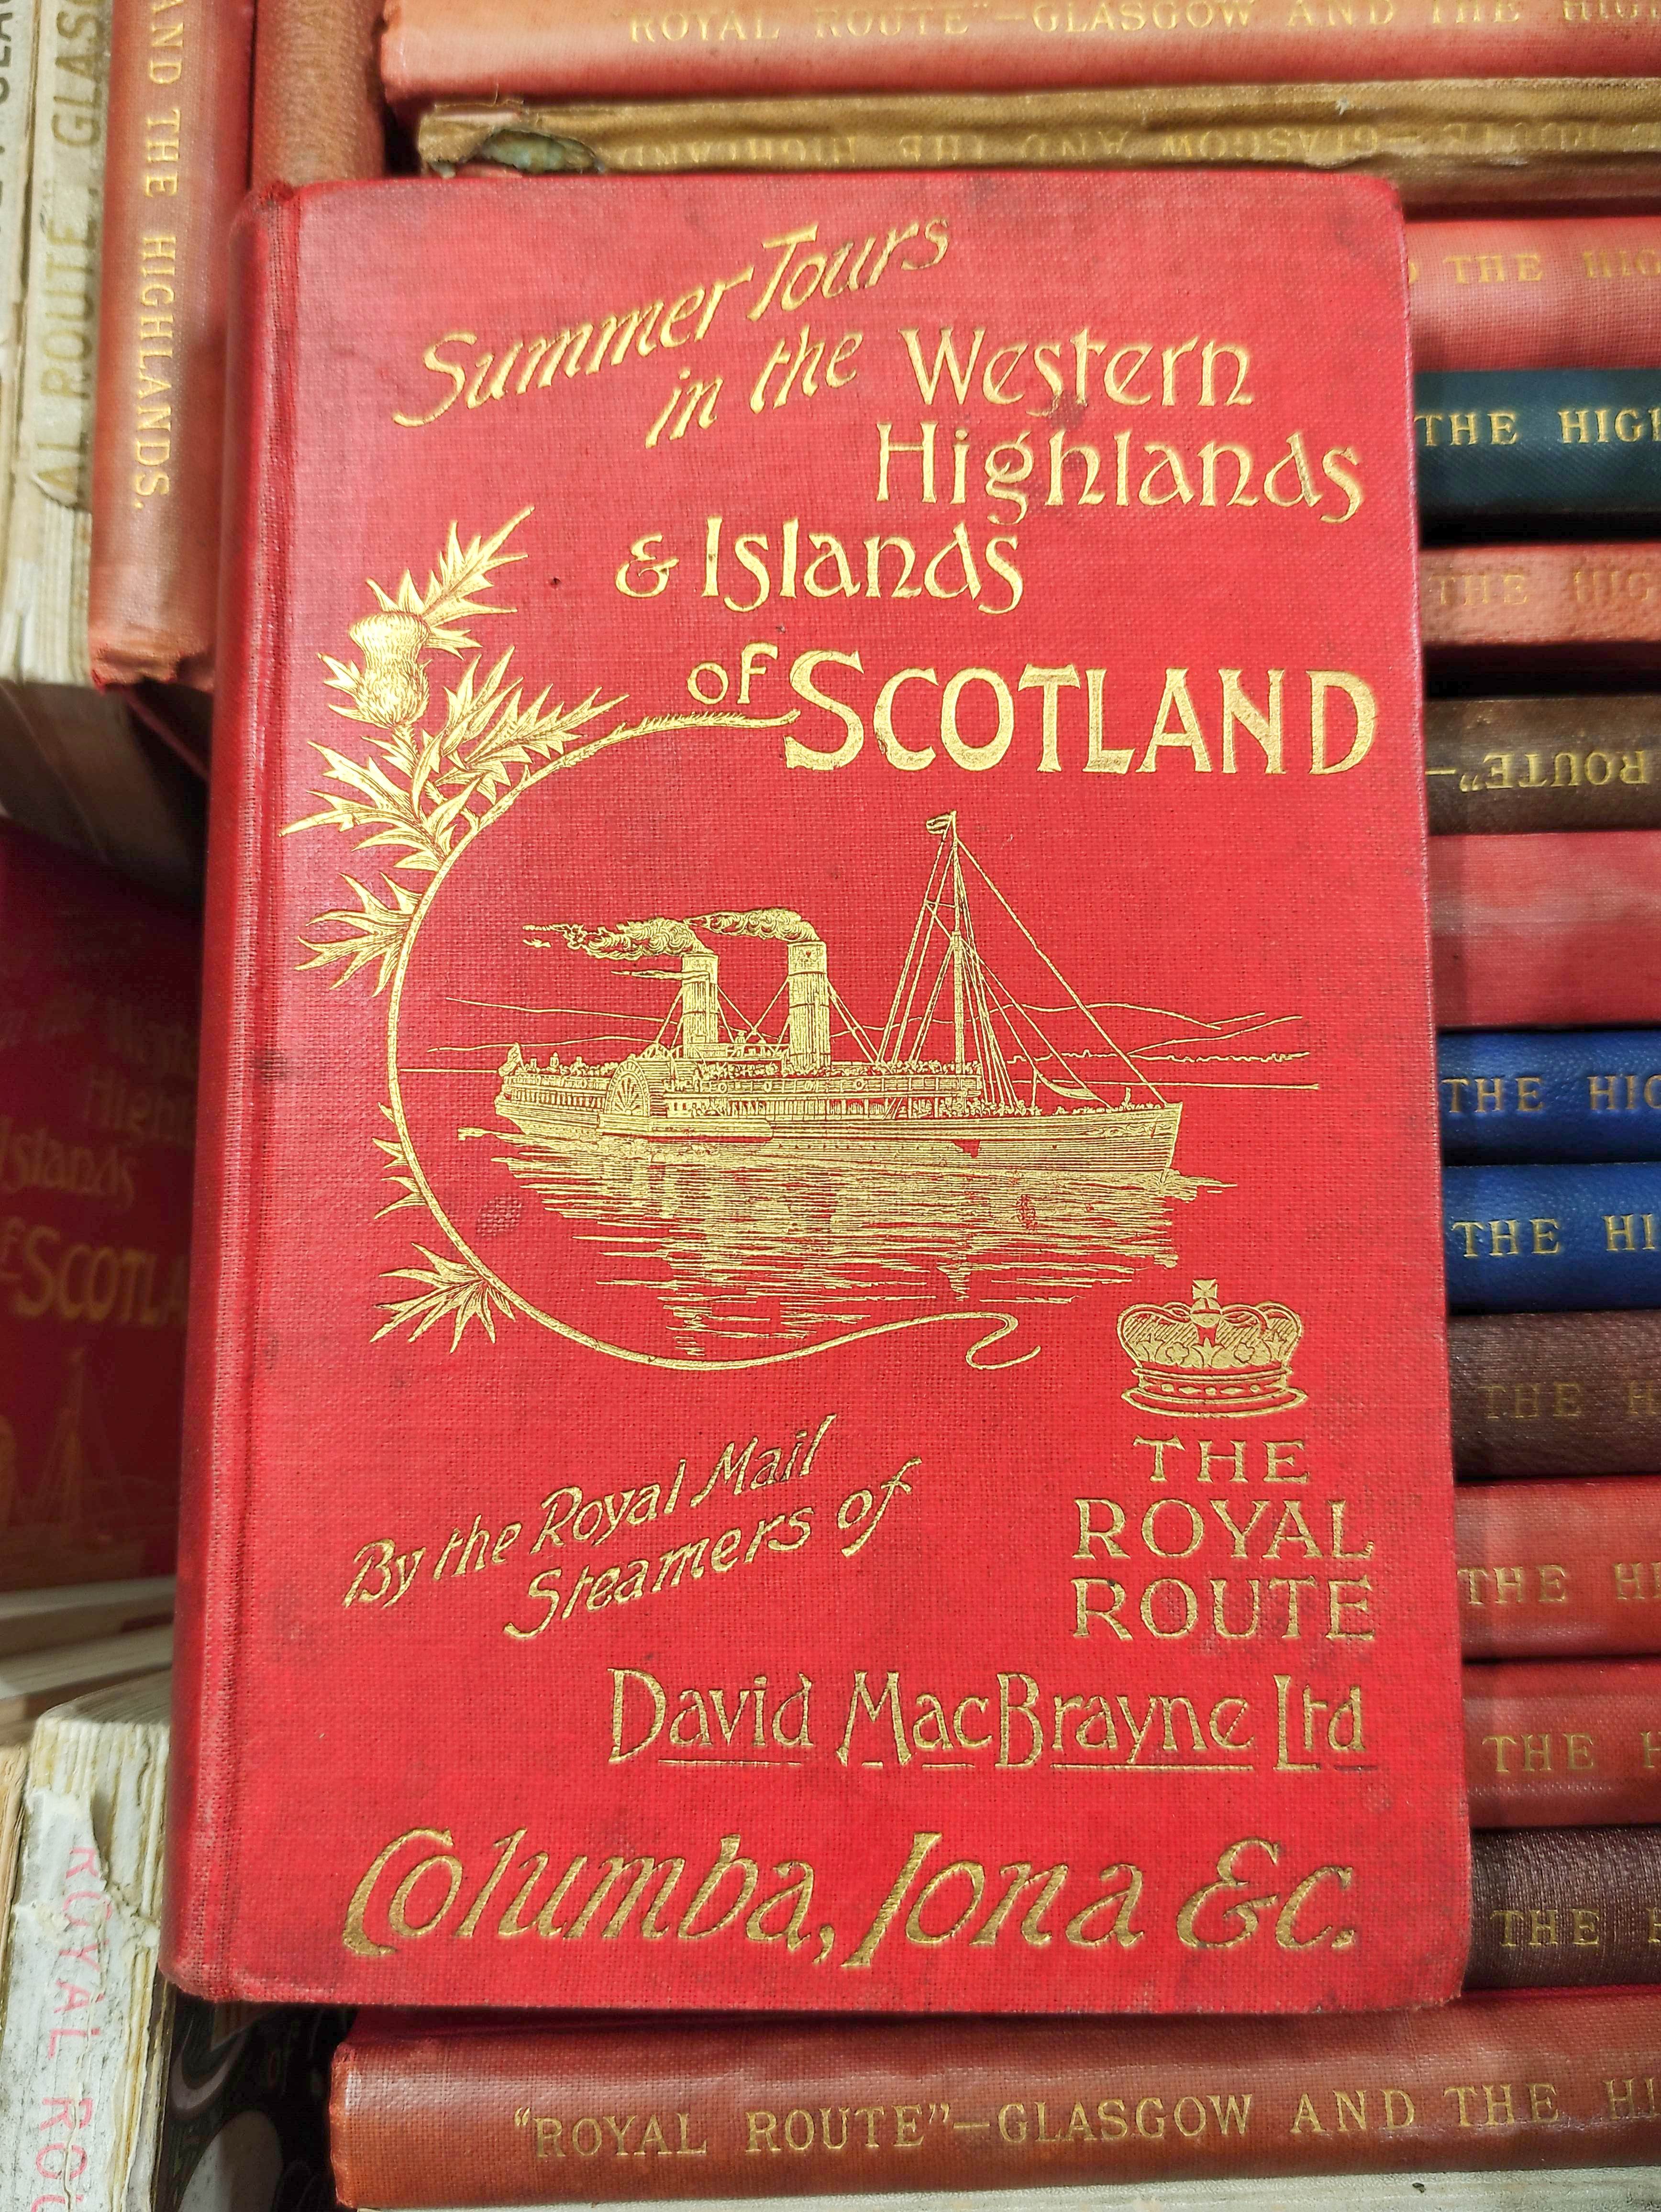 DAVID MACBRAYNE LIMITED.  A good collection of 44 copies & editions of MacBrayne's Summer Tours in - Image 10 of 10